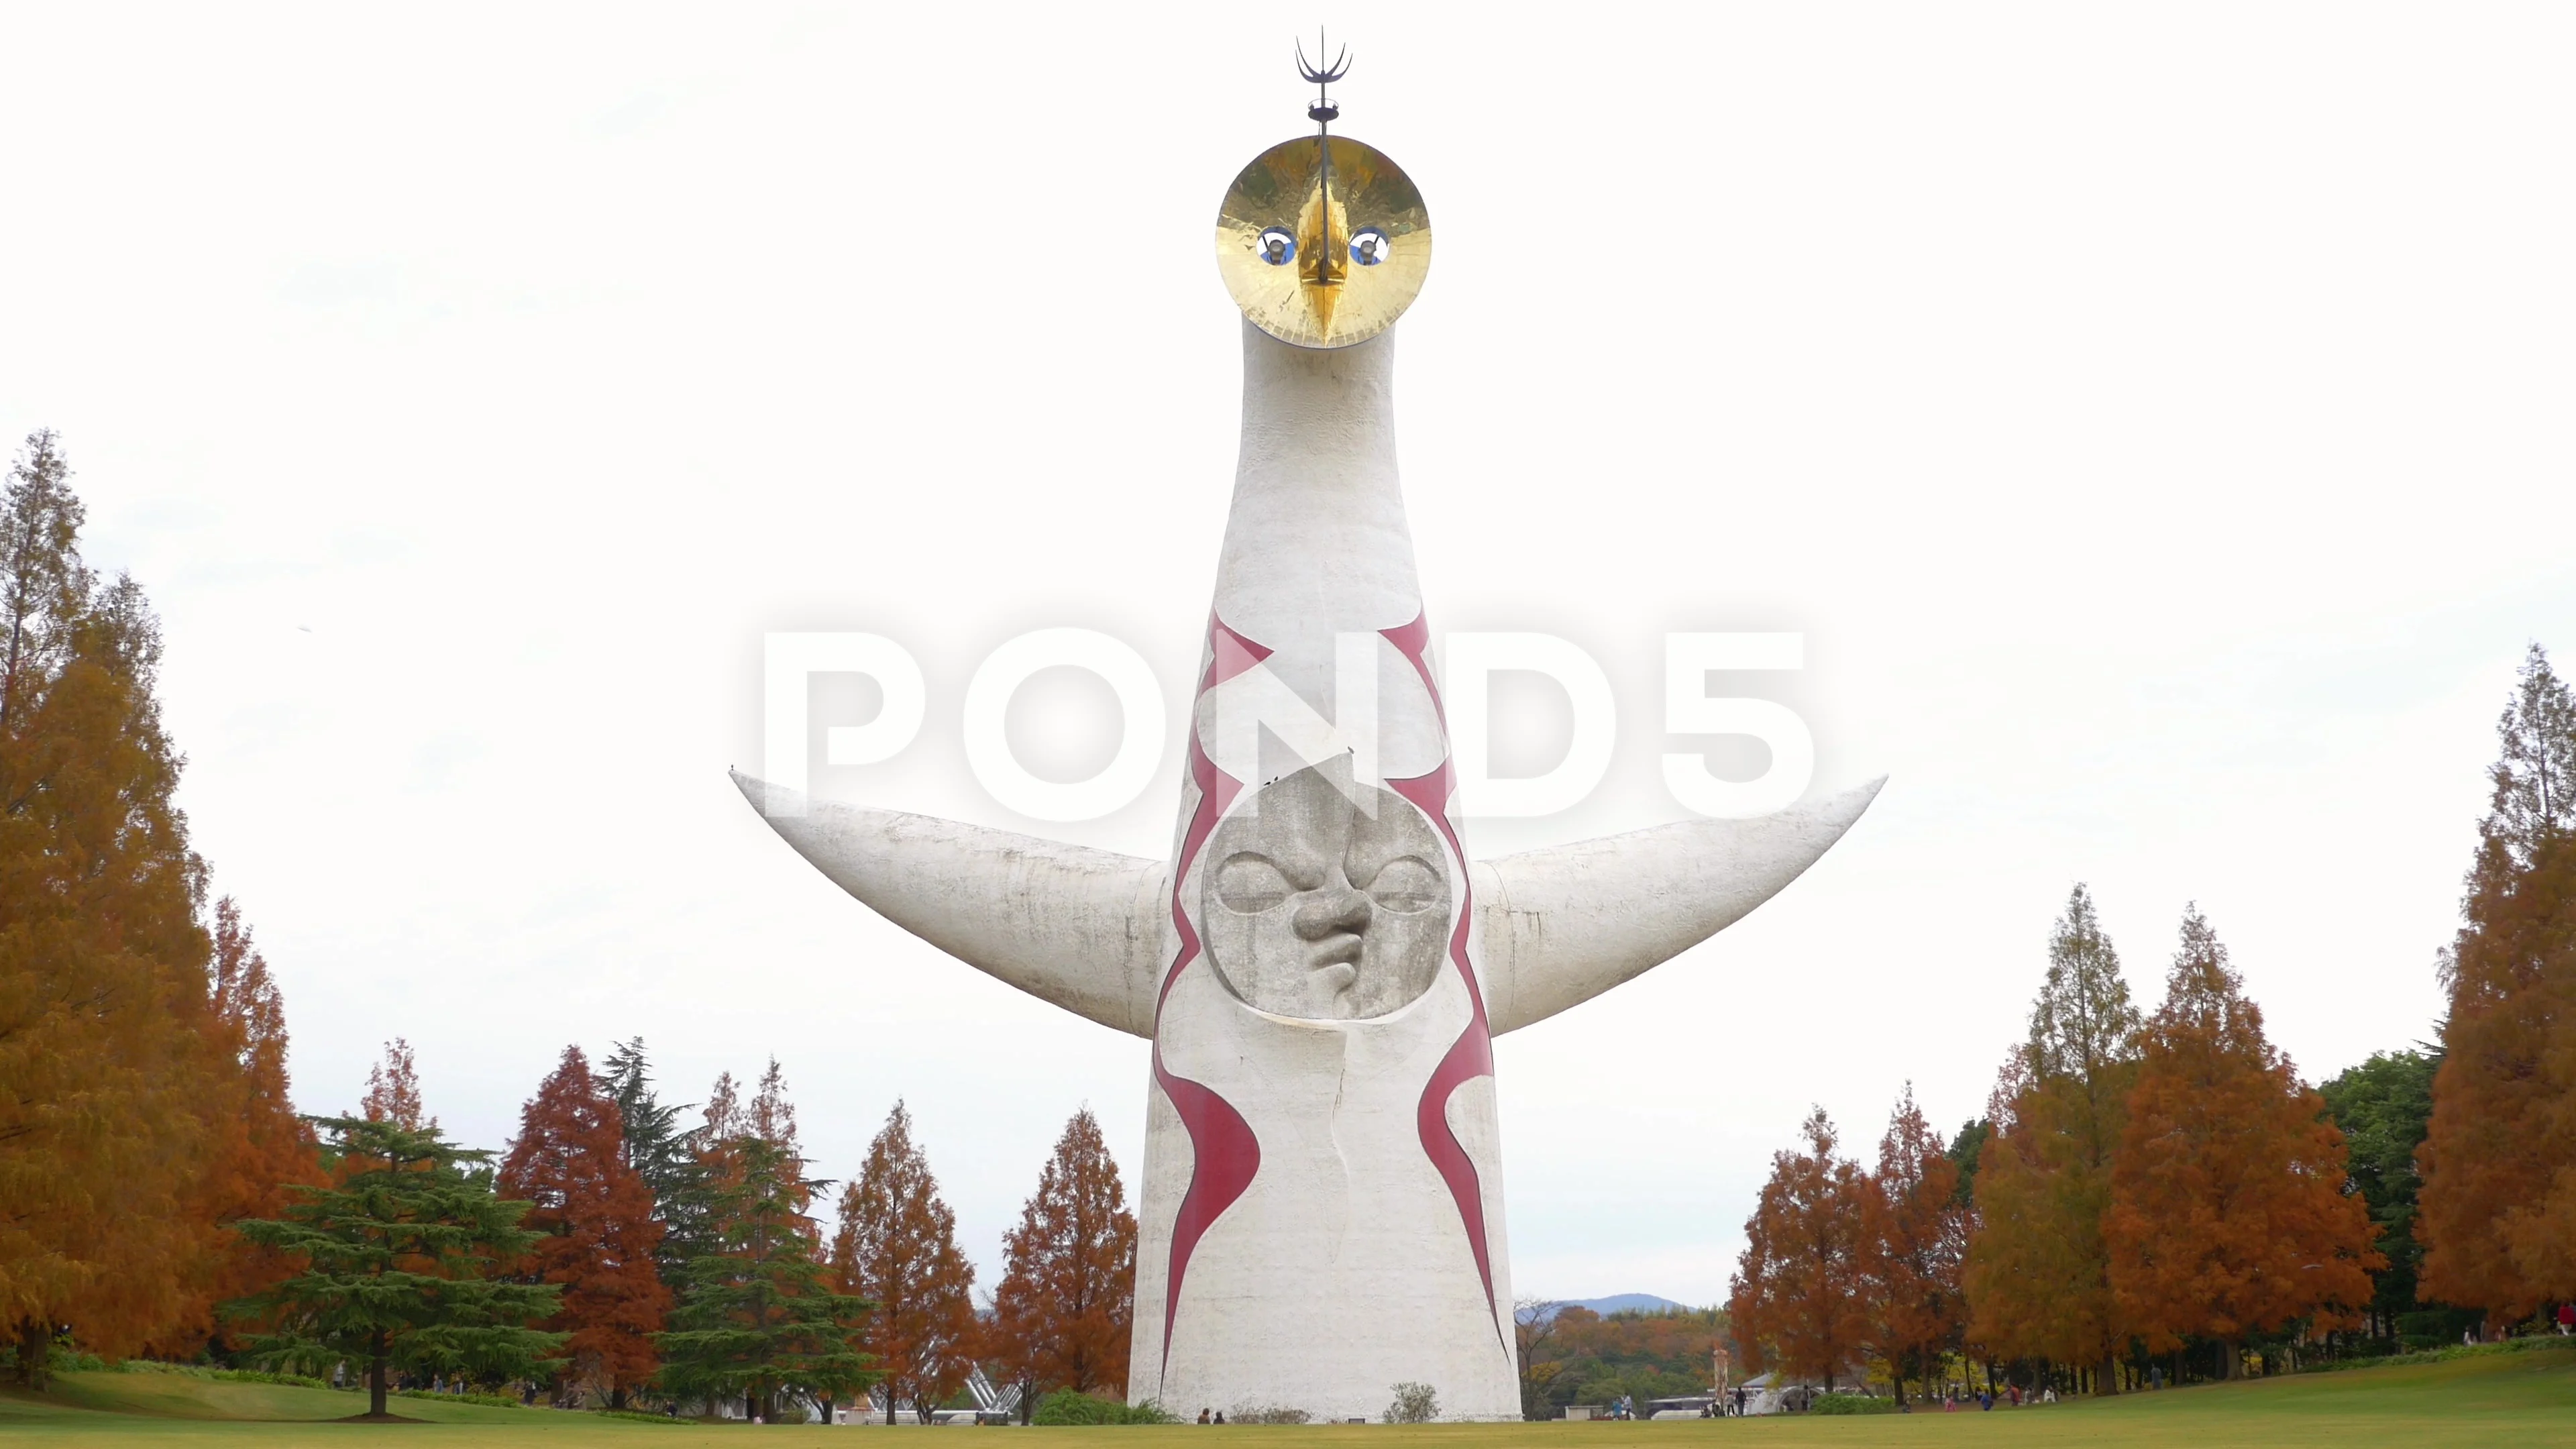 Tower of the Sun Statue by Okamoto Taro, built for Expo 70', in Osaka